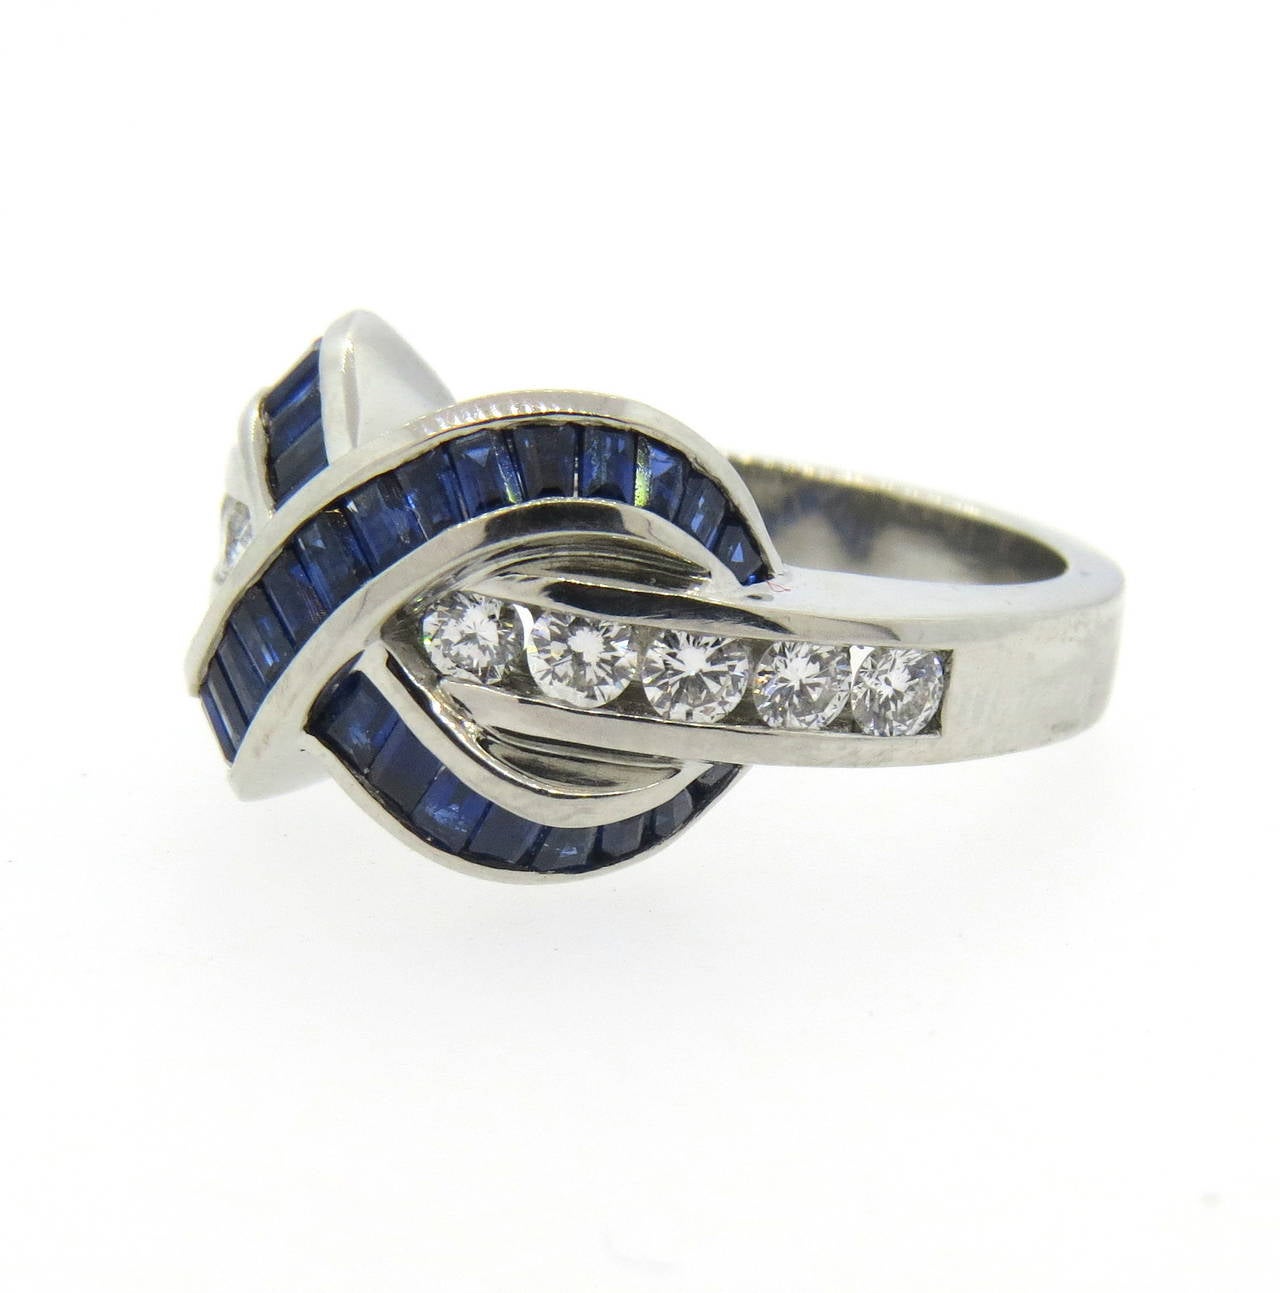 Platinum ring by Krypell, featuring designer's iconic look. Ring is a size 6 1/2, ring top is 13mm x 16mm.  Diamonds approx. 0.50ctw and sapphires are approx. 1.00ctw. Marked Krypell,950. Weight of the piece - 16 grams